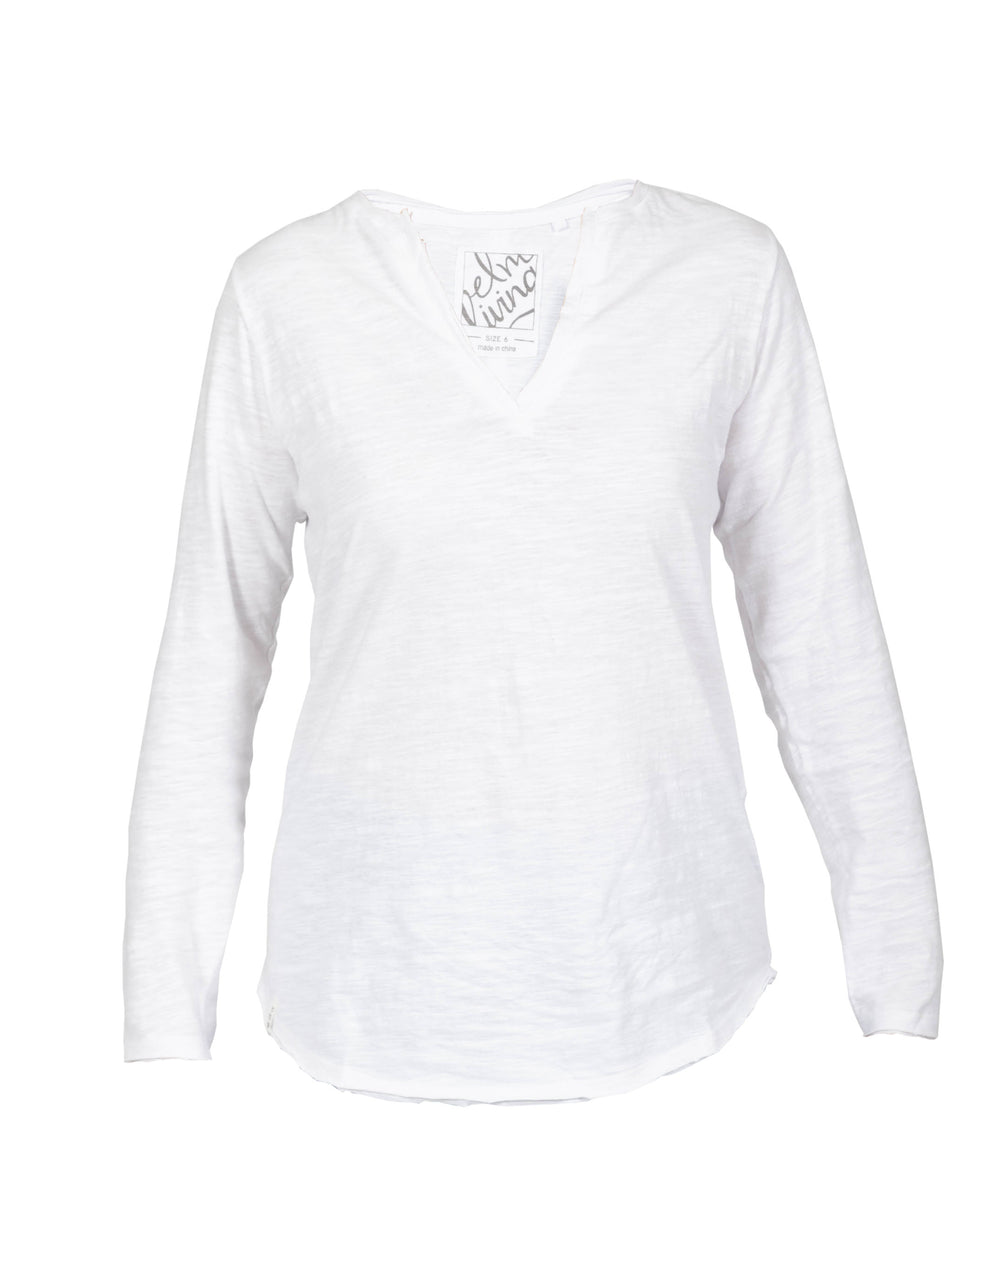 white-and-co-elm-coles-bay-long-sleeve-henley-white-womens-clothing